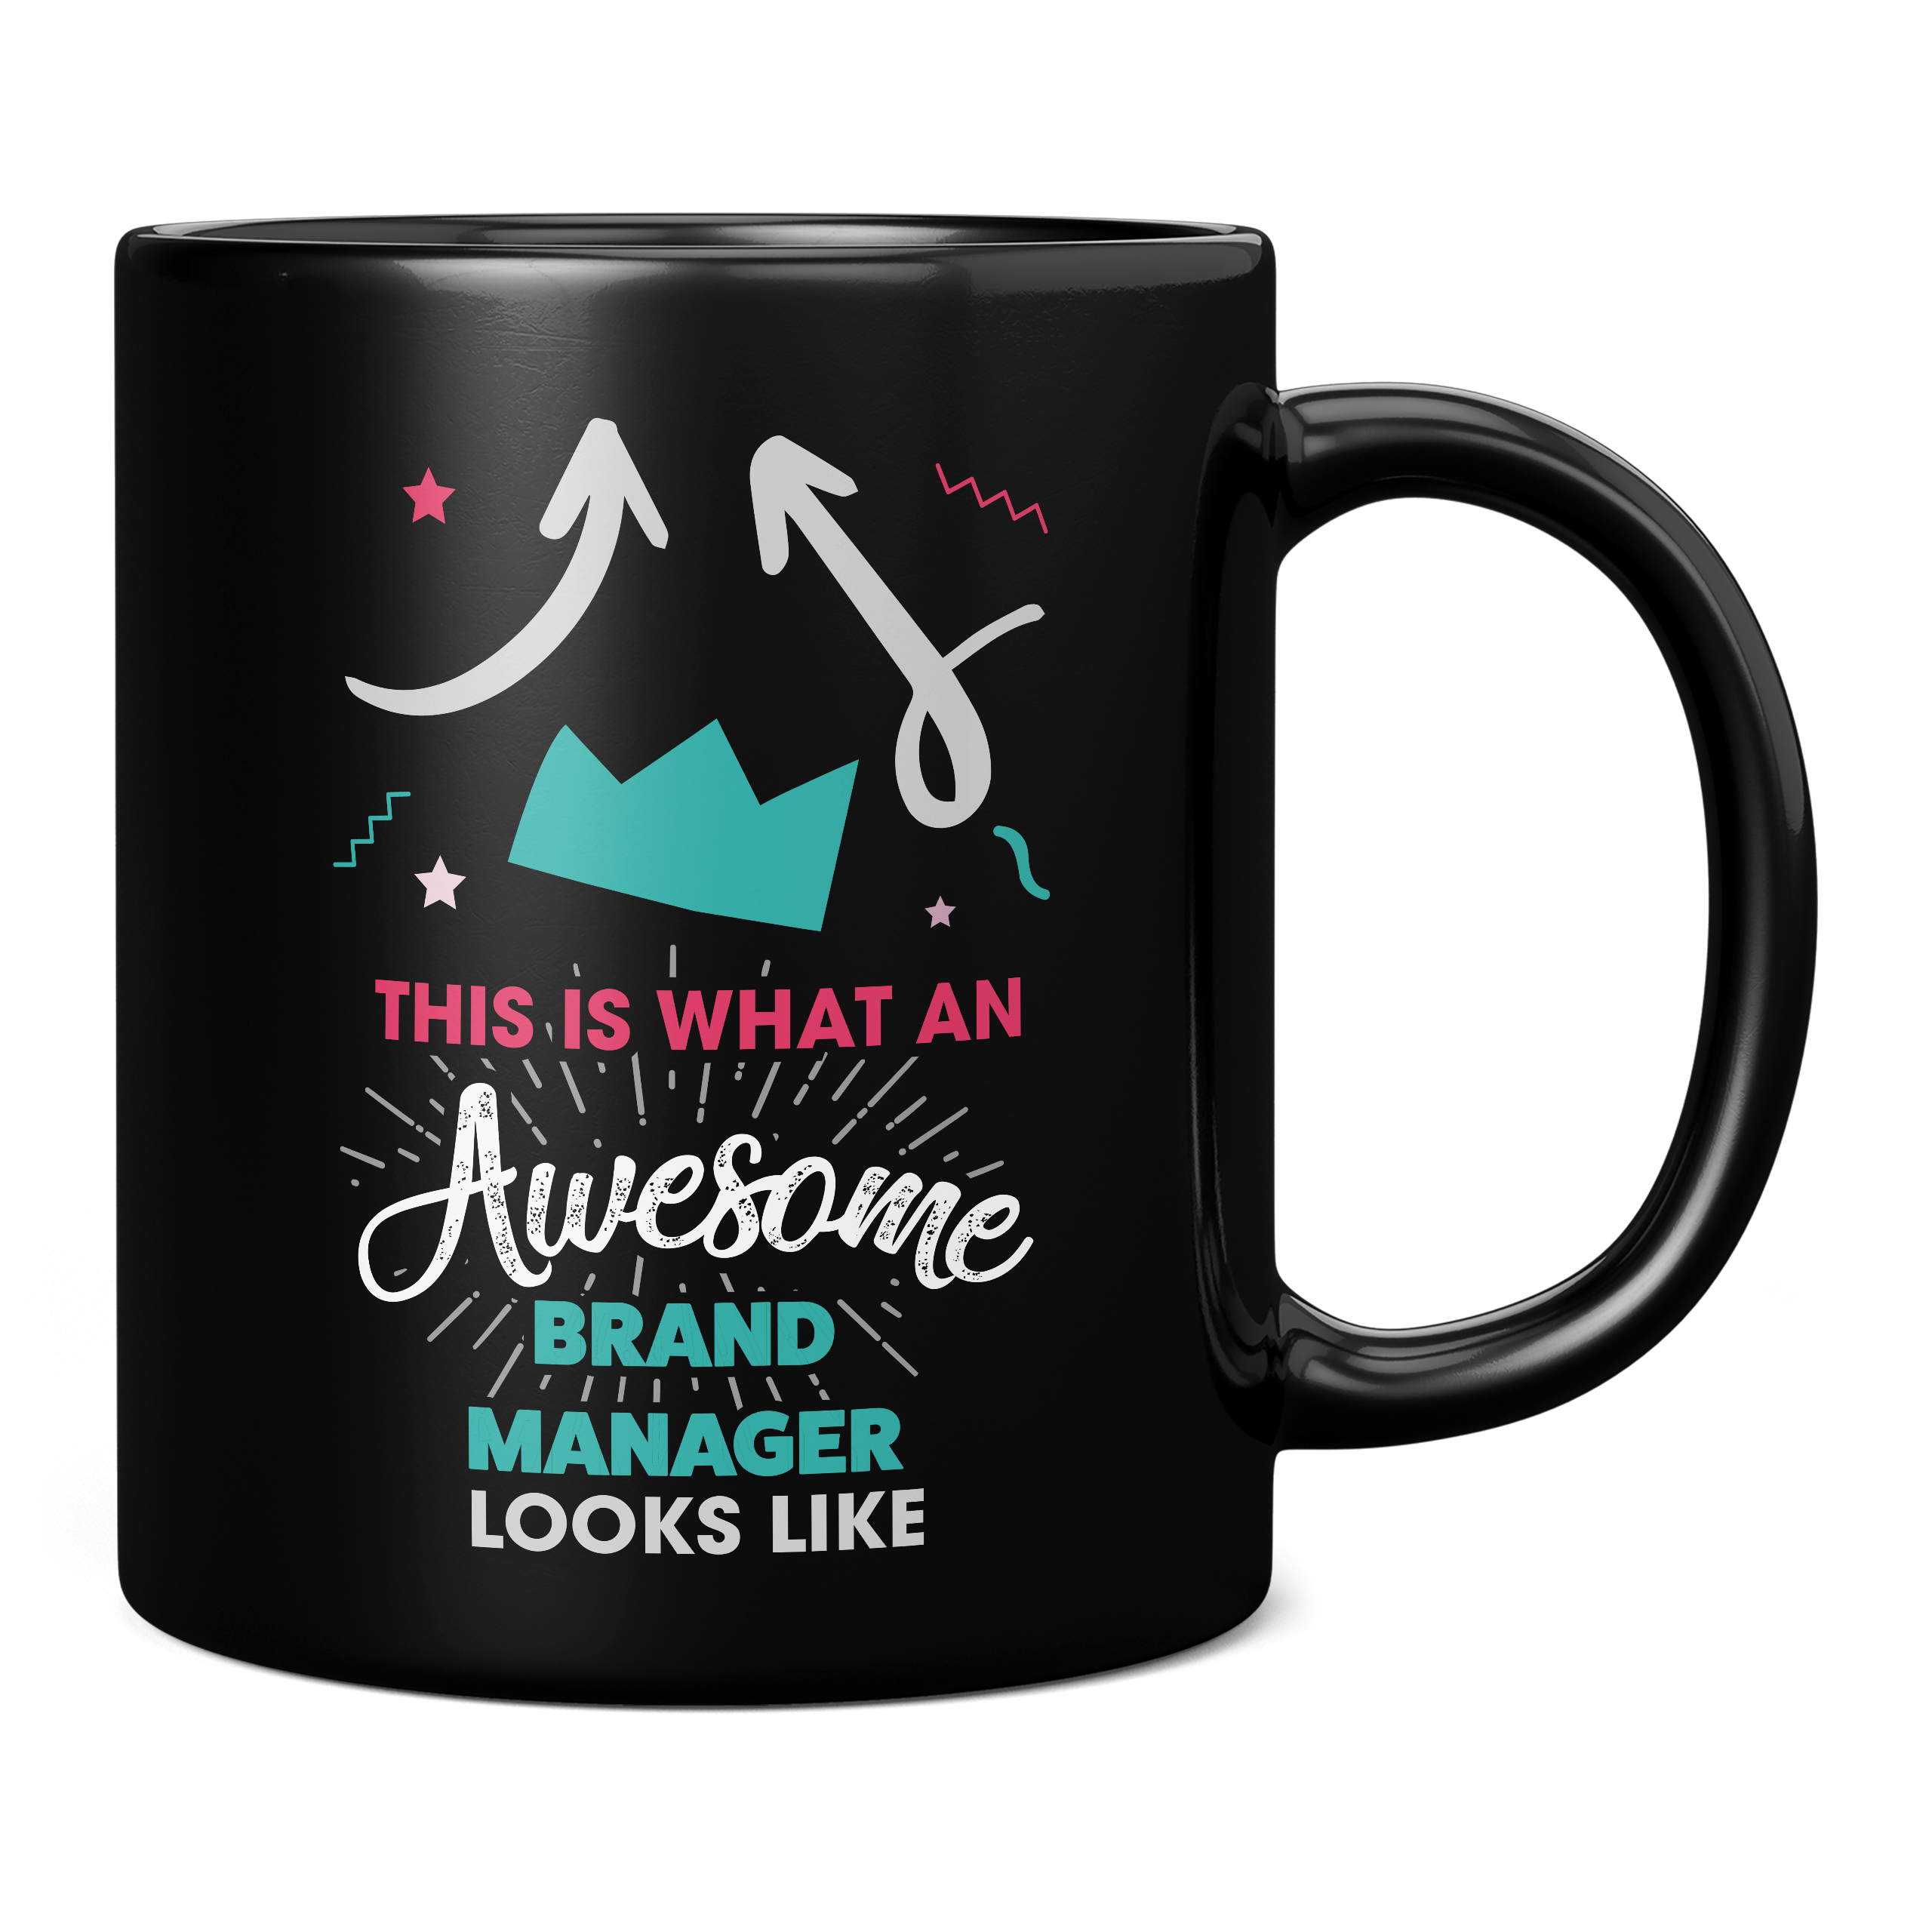 THIS IS WHAT AN AWESOME BRAND MANAGER LOOKS LIKE 11OZ NOVELTY MUG